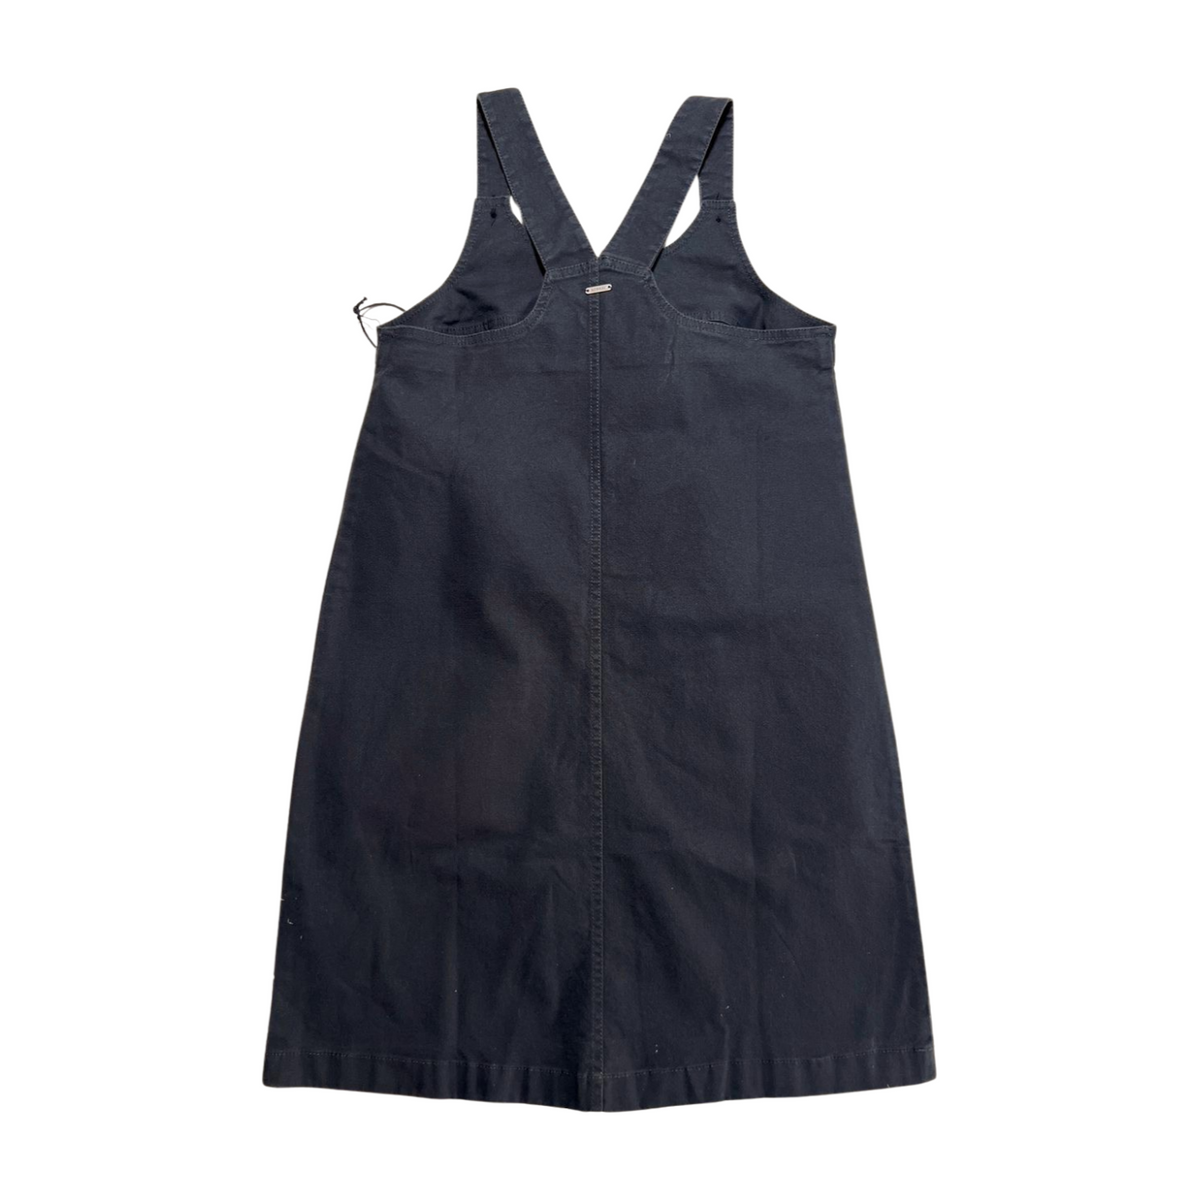 The Normal Brand- Navy Blue "Scout" Dress NEW WITH TAGS!